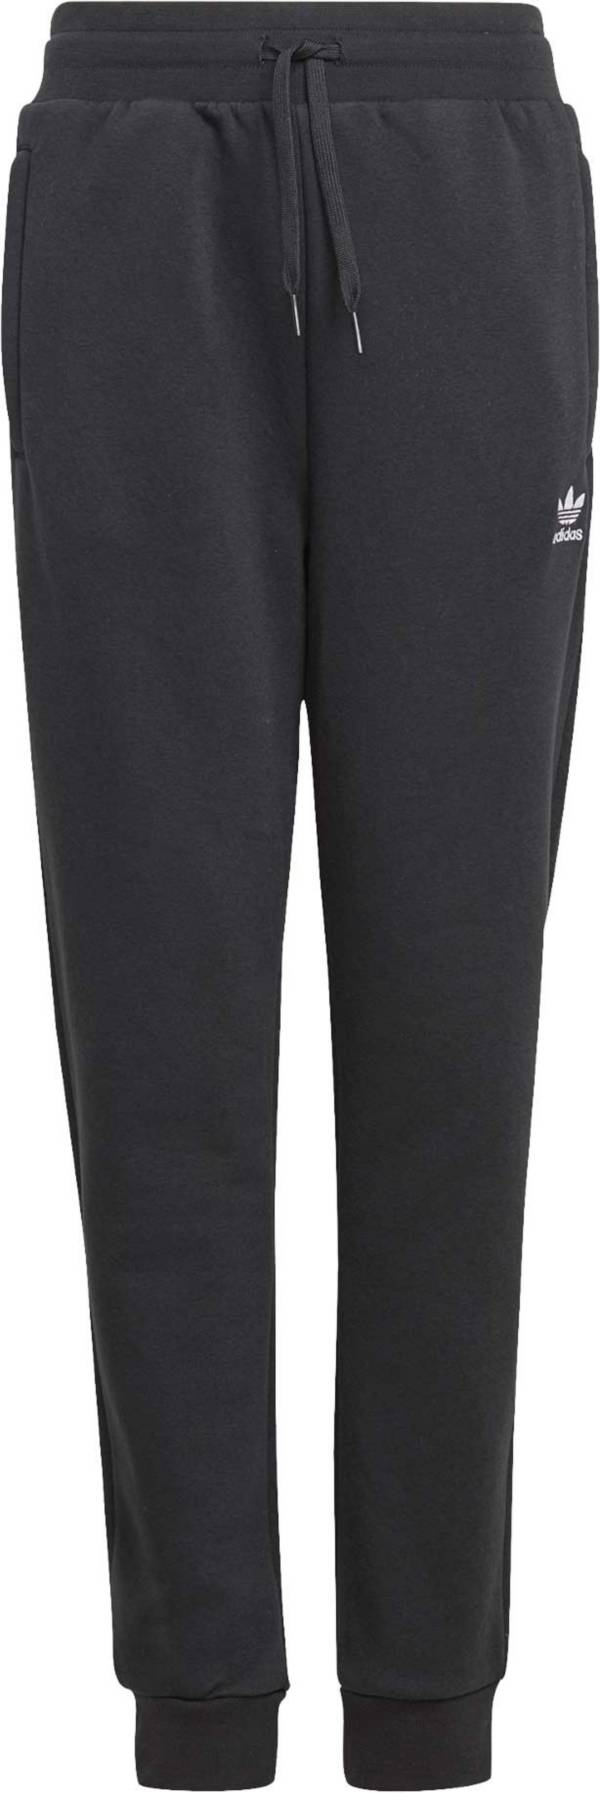 adidas Youth Essential Adicolor Pants | Dick\'s Sporting Goods